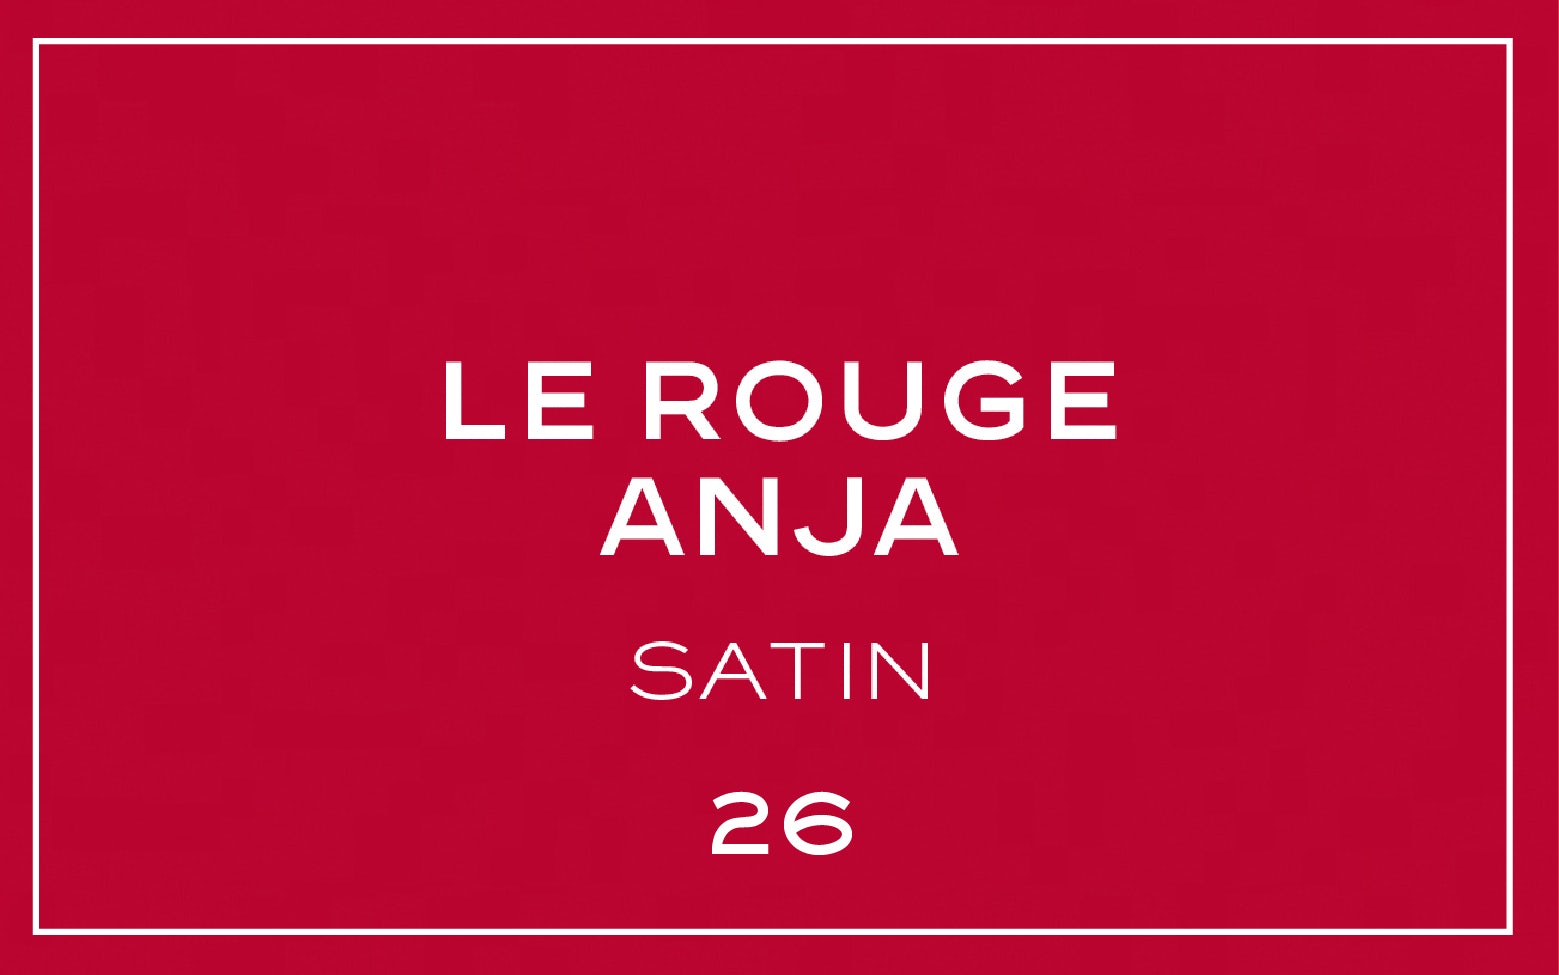 La bouche rouge Le Rouge Anja lipstick swatch with text